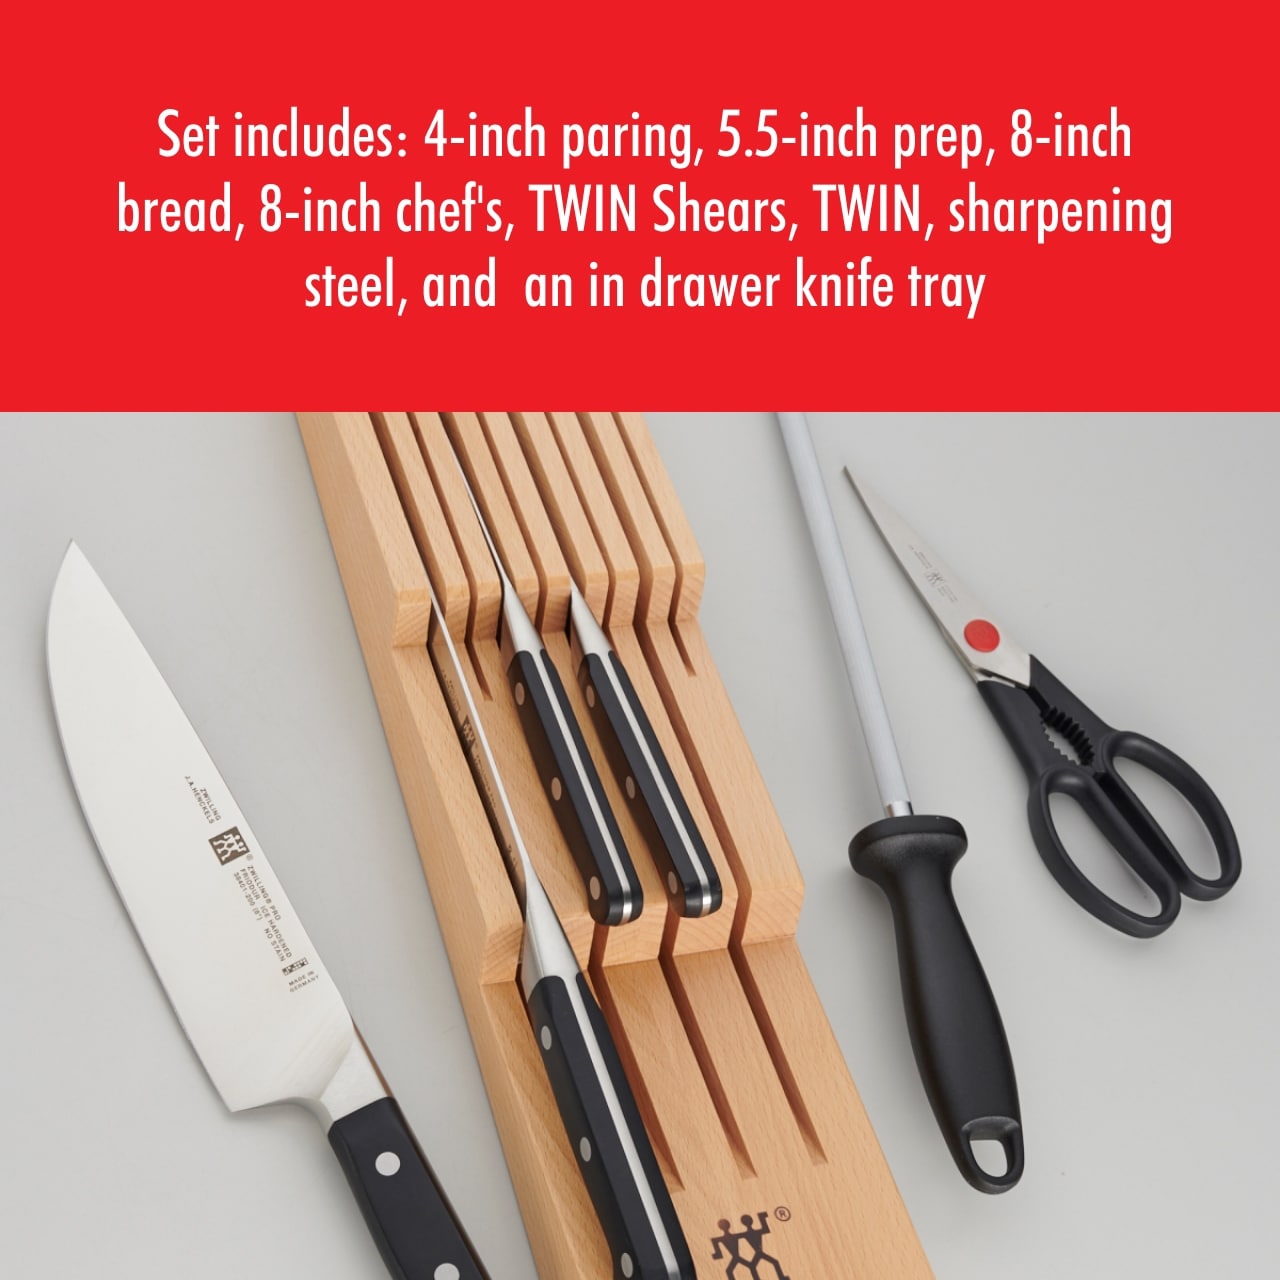 https://ak1.ostkcdn.com/images/products/is/images/direct/d407a0f4e3ef6577f83b1a1fd0f14961f05608f3/ZWILLING-Pro-7-pc-Knife-Block-Set-with-In-Drawer-Knife-Tray.jpg